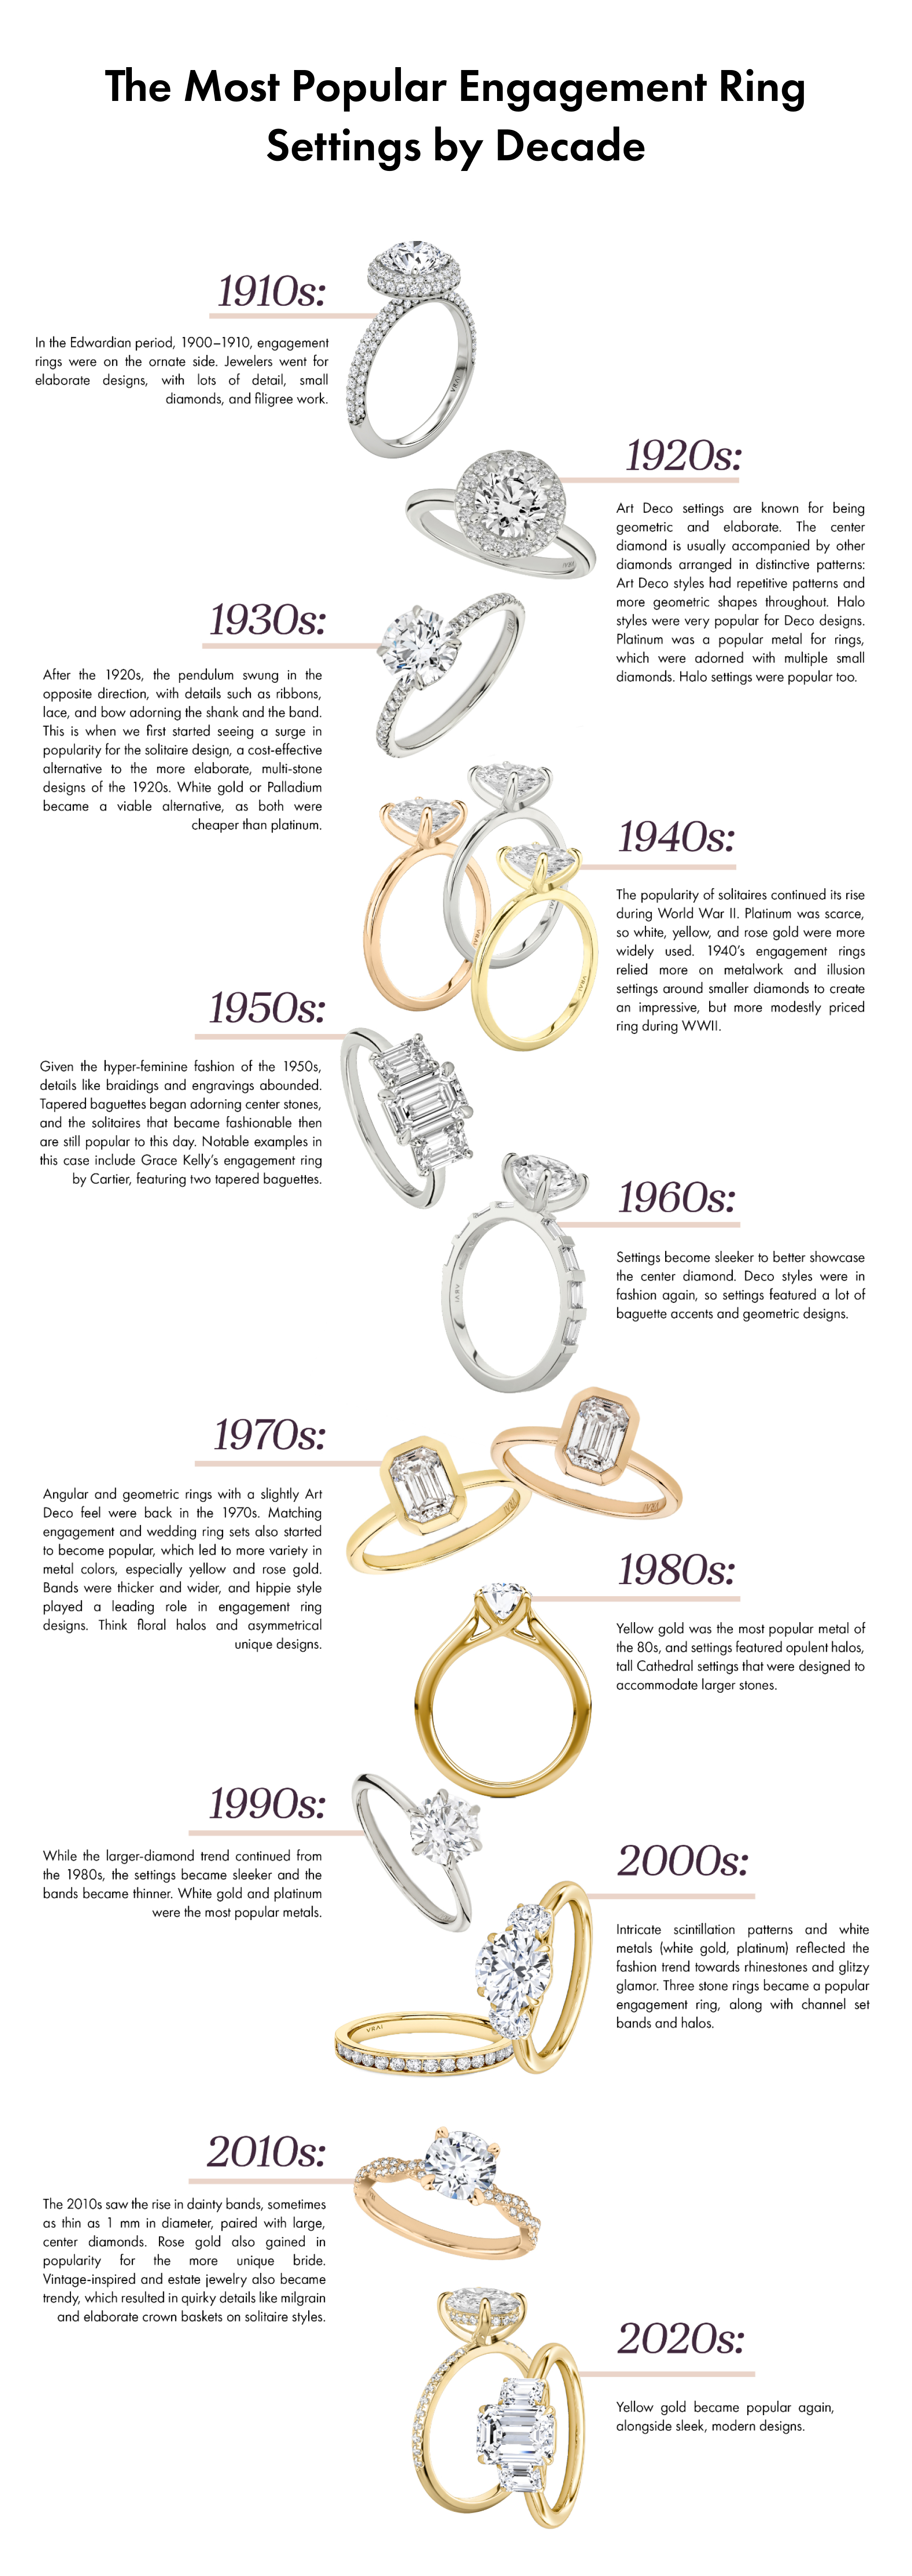 timeline showing the most popular engagement ring settings by decade from art deco settings in the 1920s to modern sleek designs in the 2020s